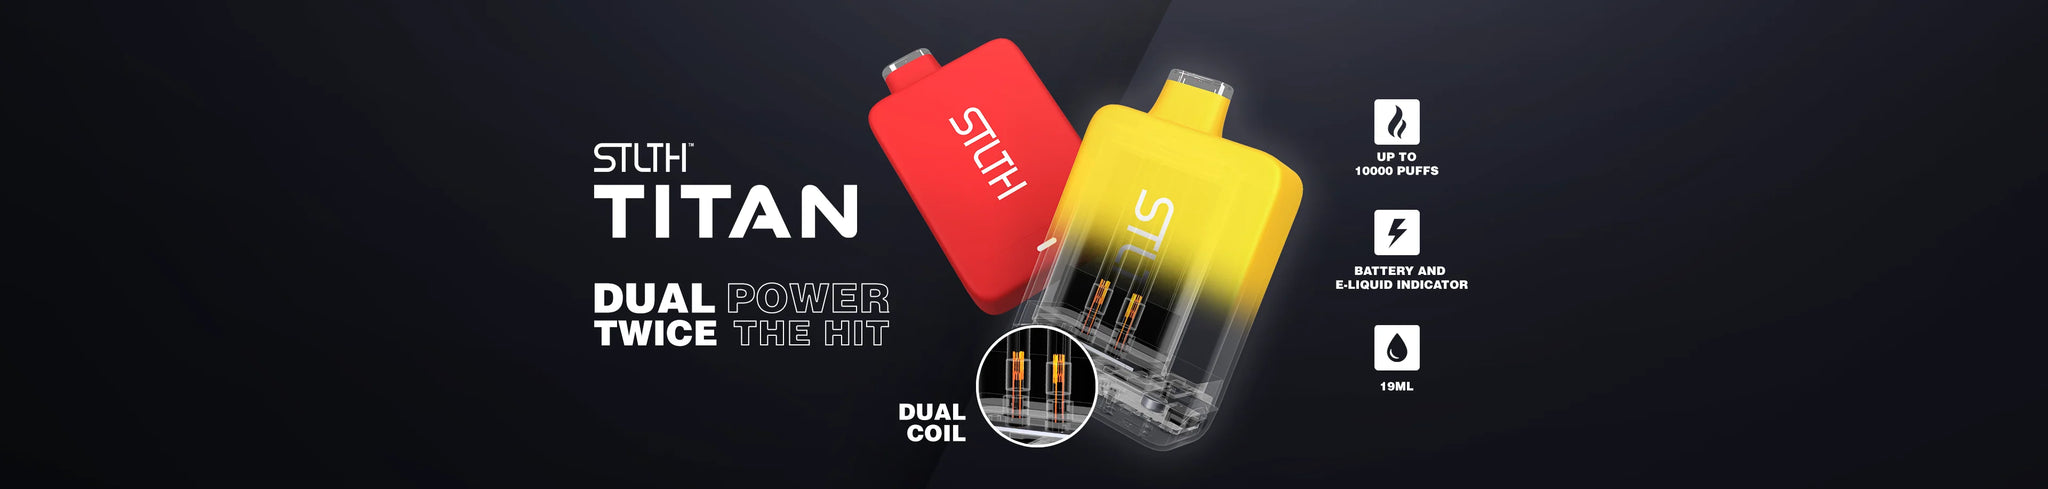 STLTH Titan 10K Disposable Vape - Canada and Quebec Free Vape Shipping